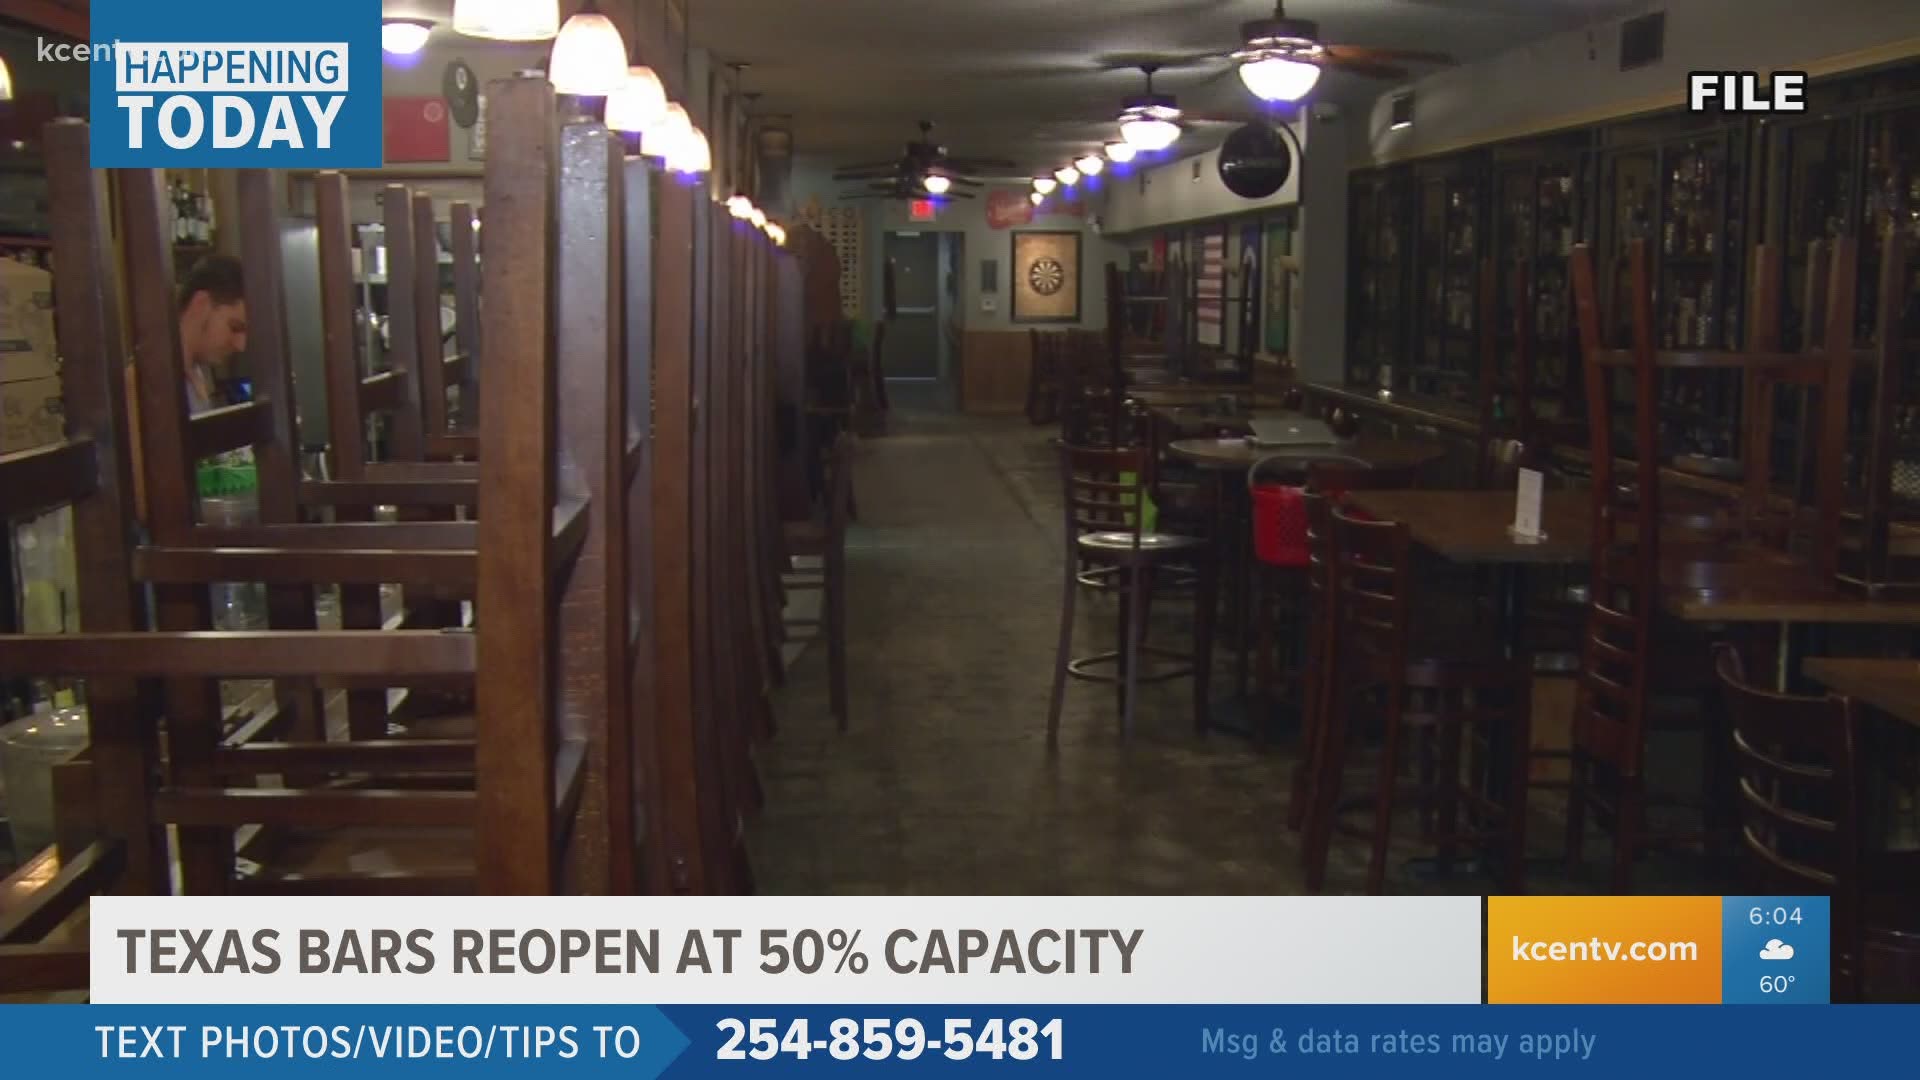 Bars in Bell and McLennan counties will be allowed to reopen today at 50% capacity.